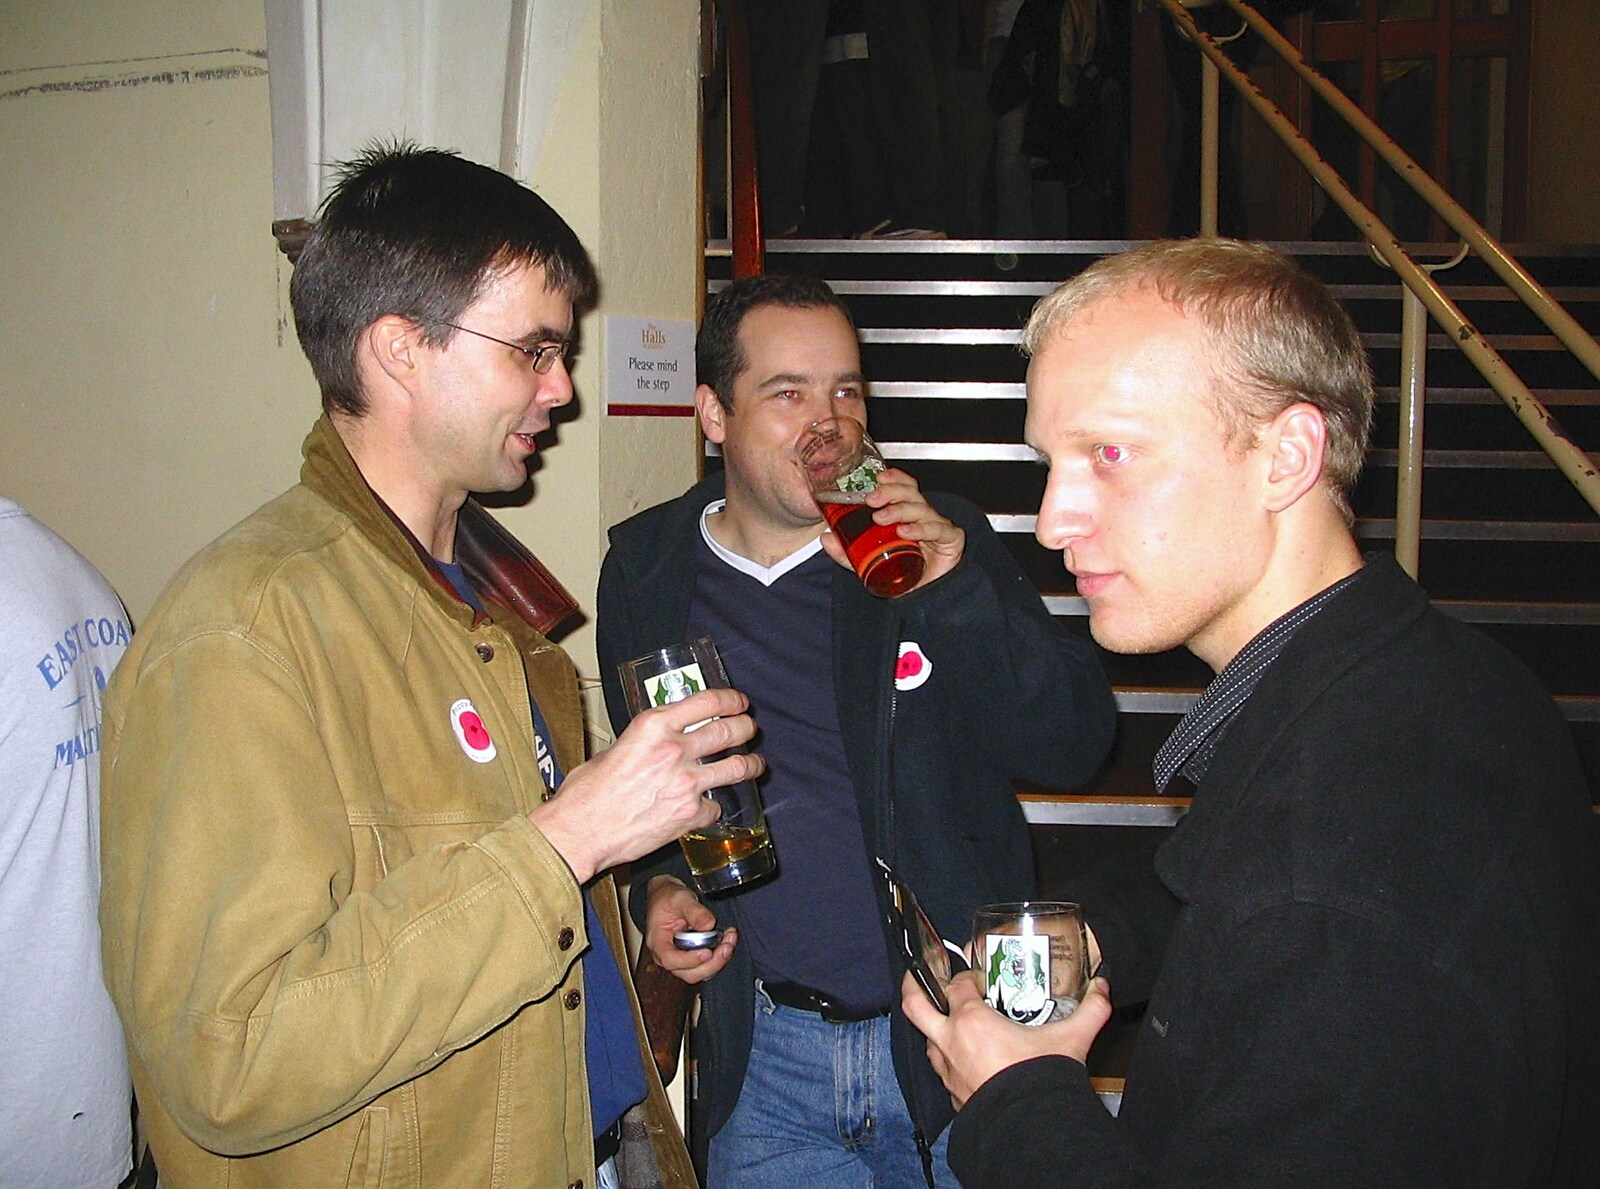 Dan and Russell from The Norfolk and Norwich Beer Festival, St. Andrew's Hall, Norwich - 27th October 2004